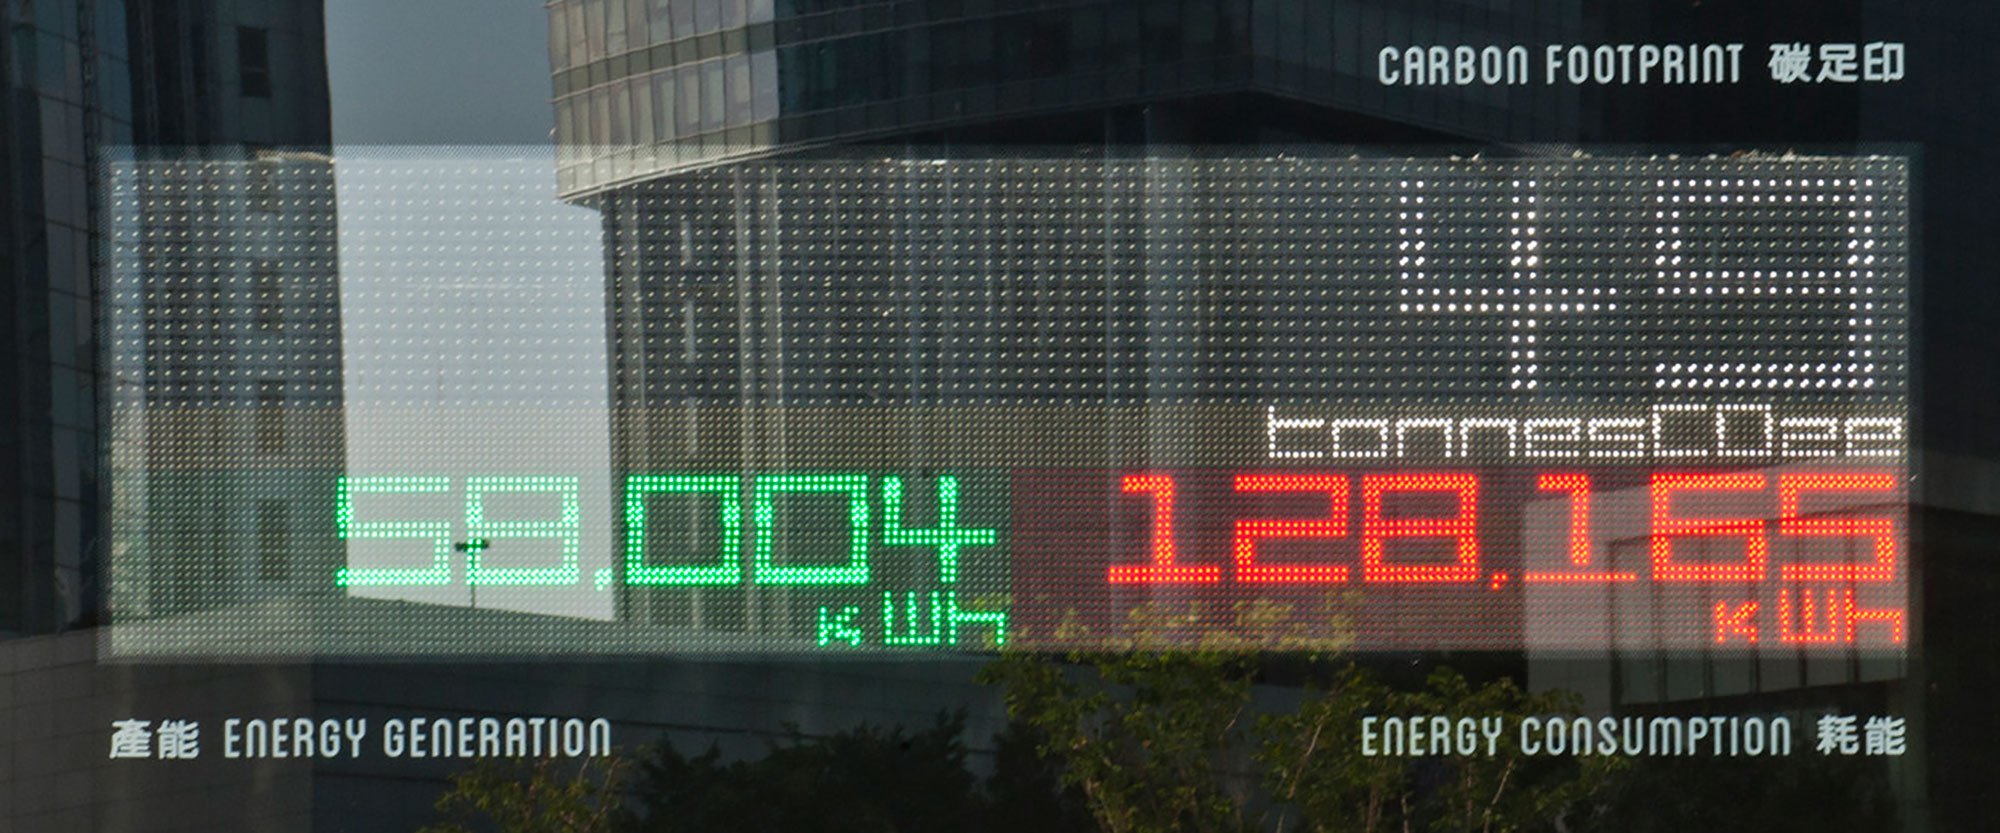 A digital screen mounted on the outside of the CIC Zero Carbon Building in Hong Kong, shows energy enerated and consumed by the building as well as the building's carbon footprint.